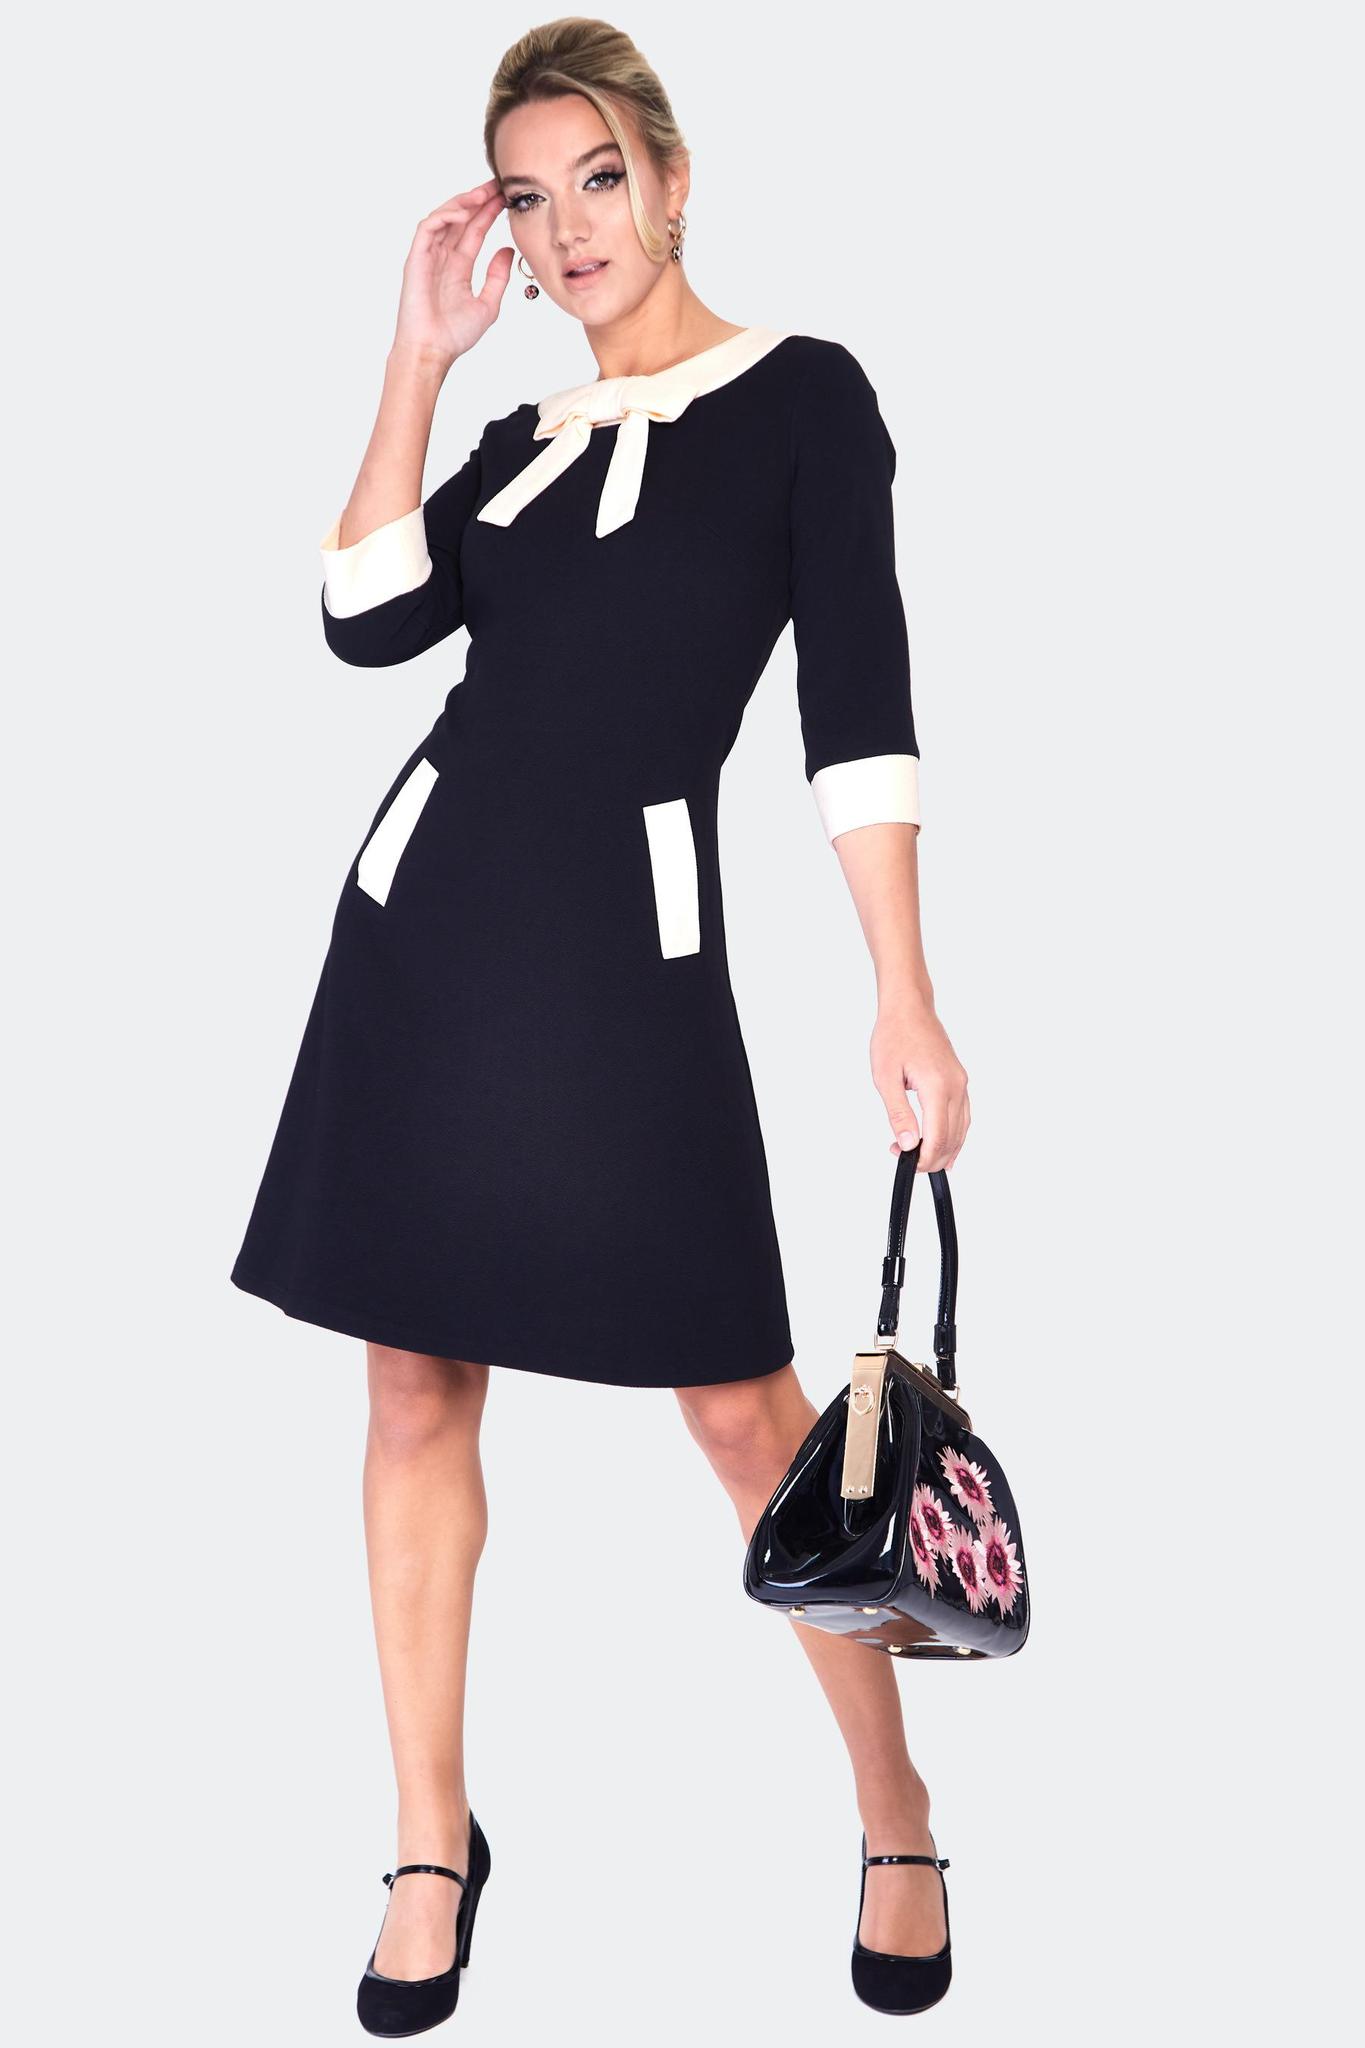 Bourgeon hegn Pensioneret Chanel Style Dress - Pretty Parlor